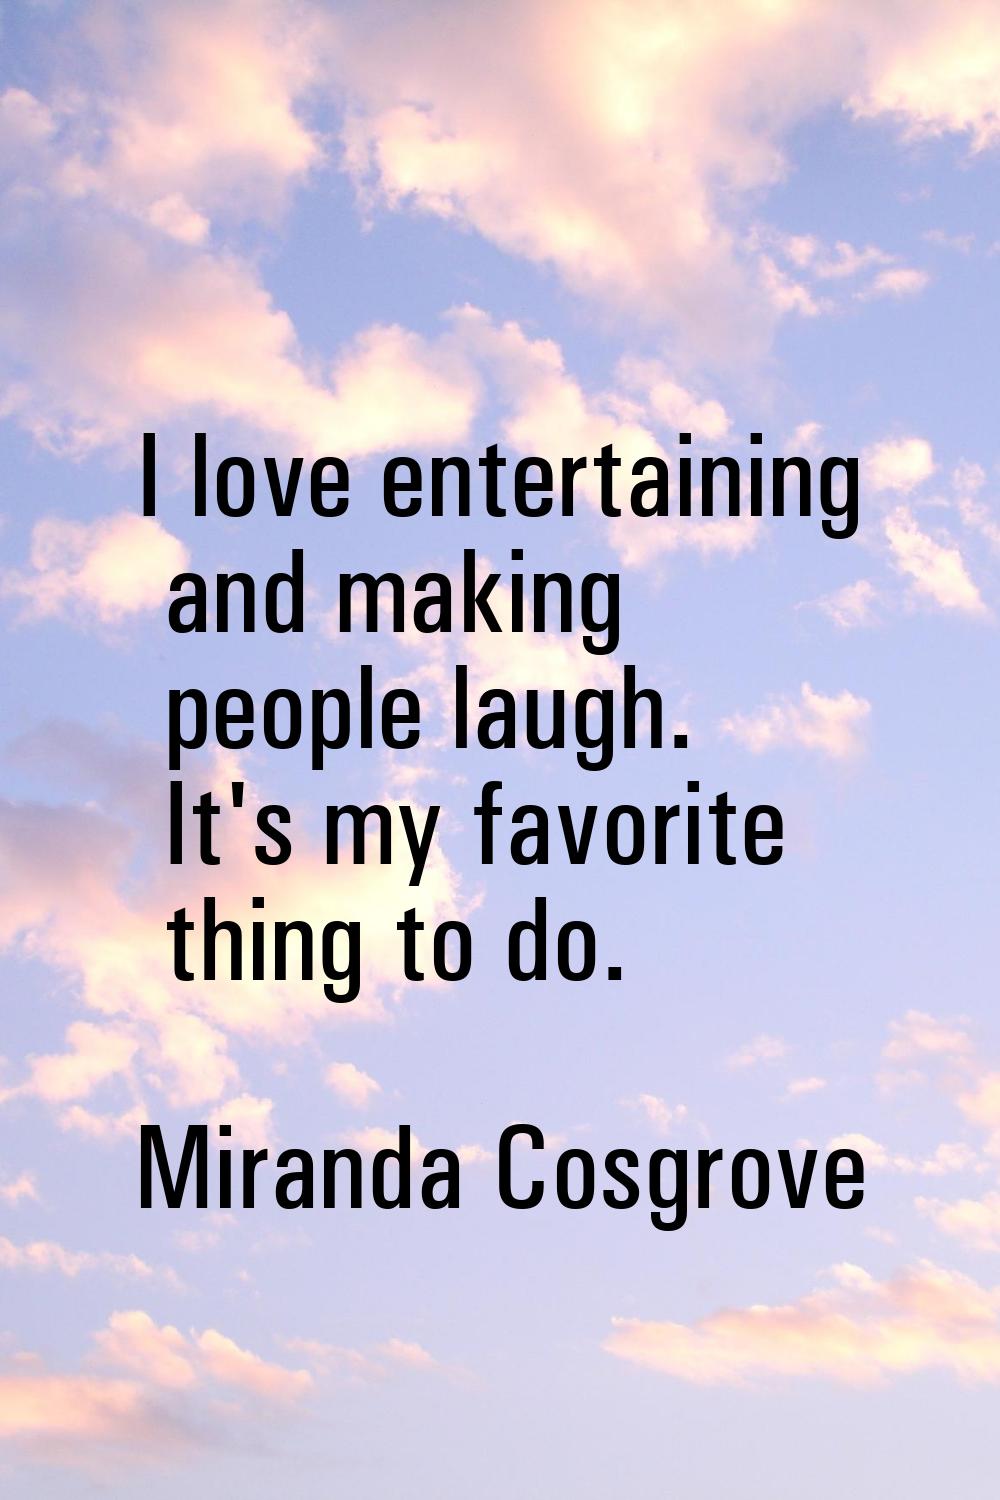 I love entertaining and making people laugh. It's my favorite thing to do.